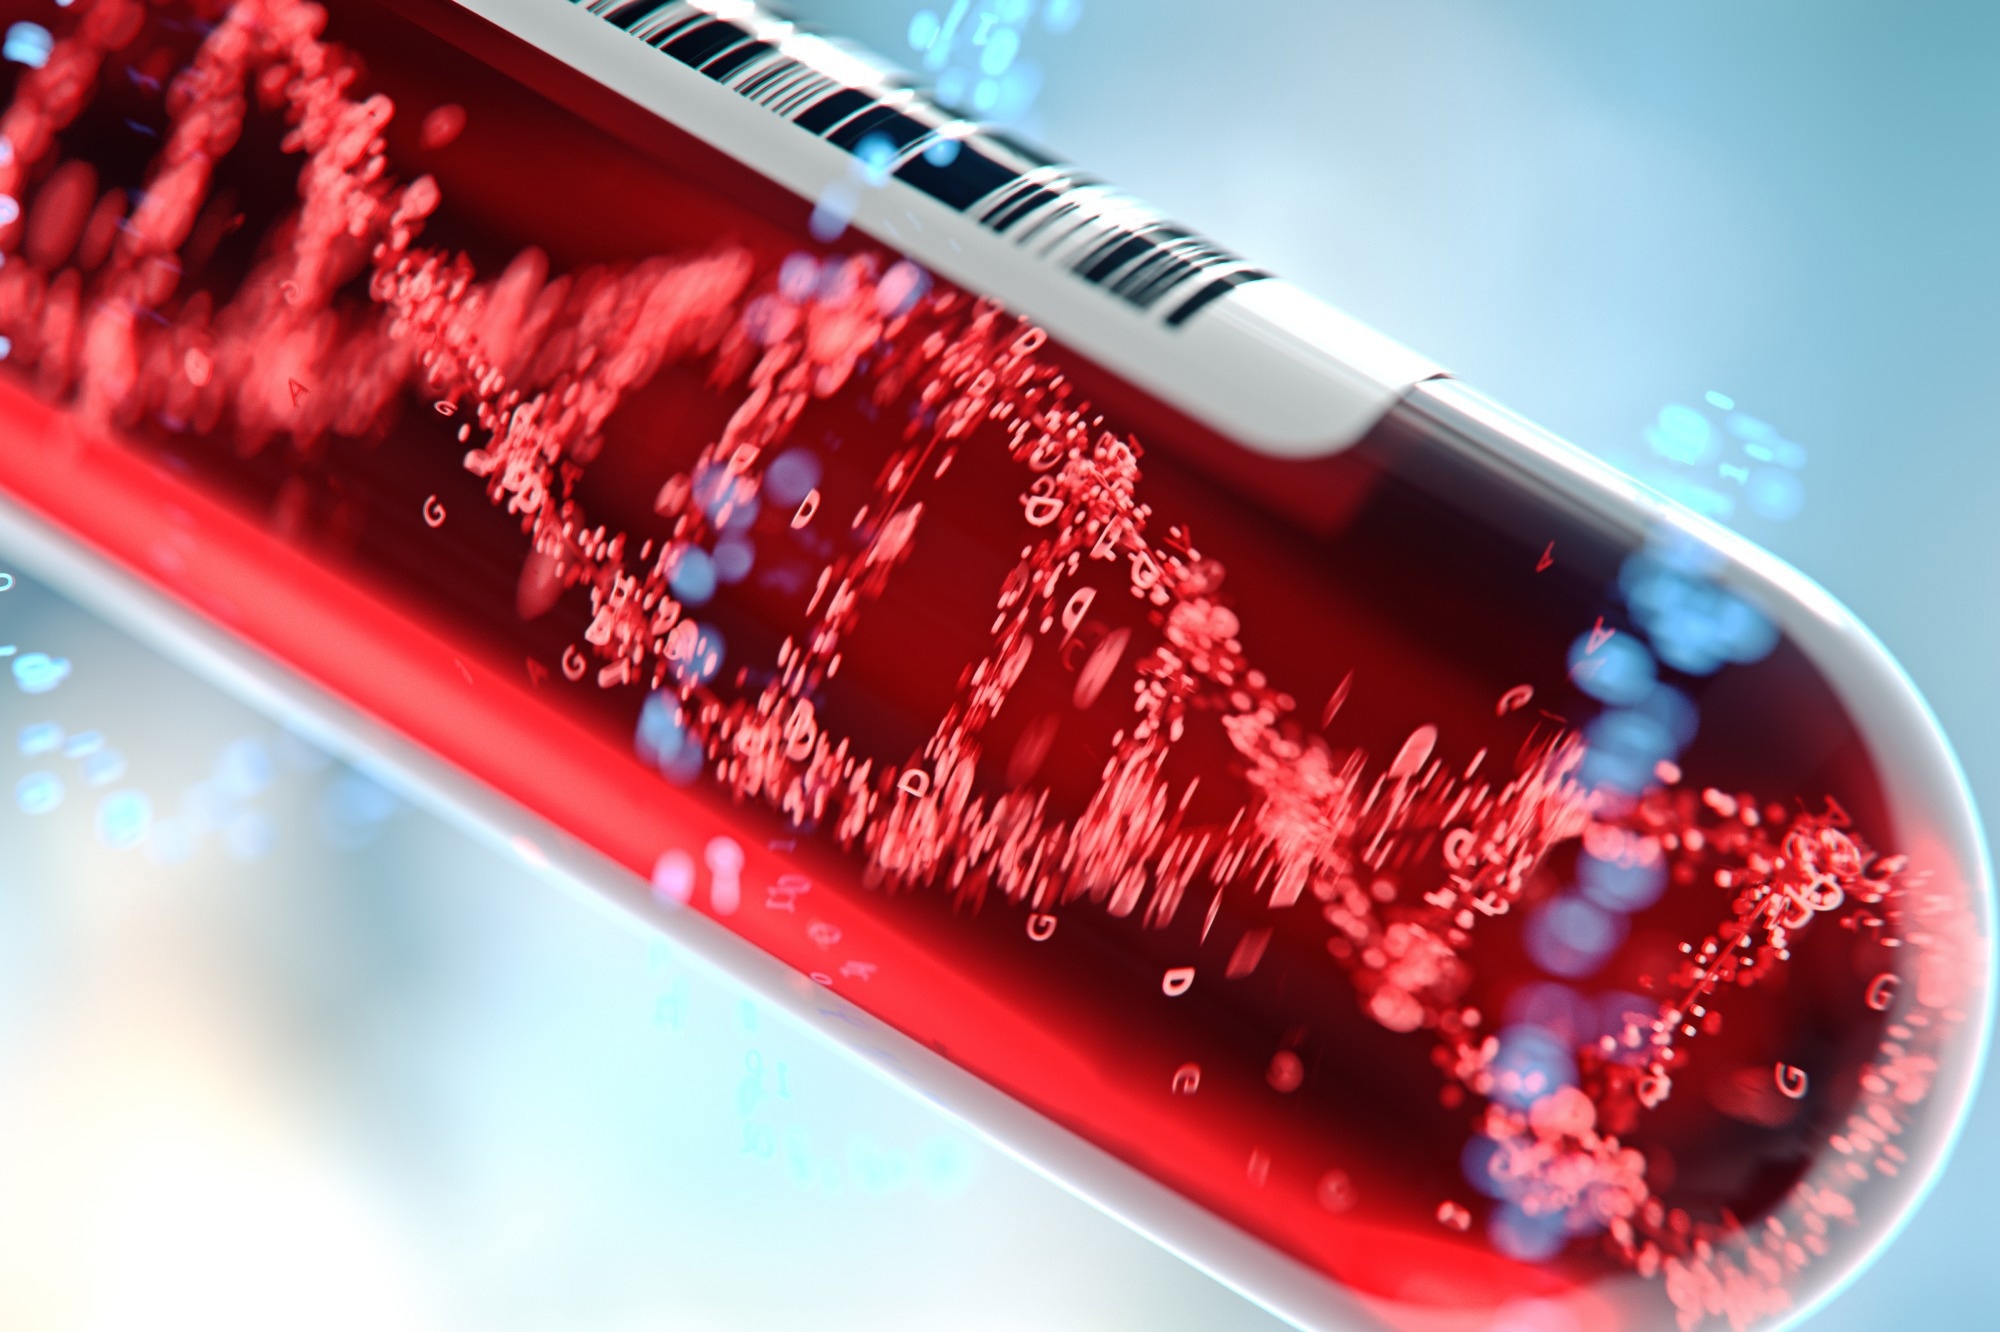 Study: A Cell-free DNA Blood-Based Test for Colorectal Cancer Screening. Image Credit: Connect world/Shutterstock.com